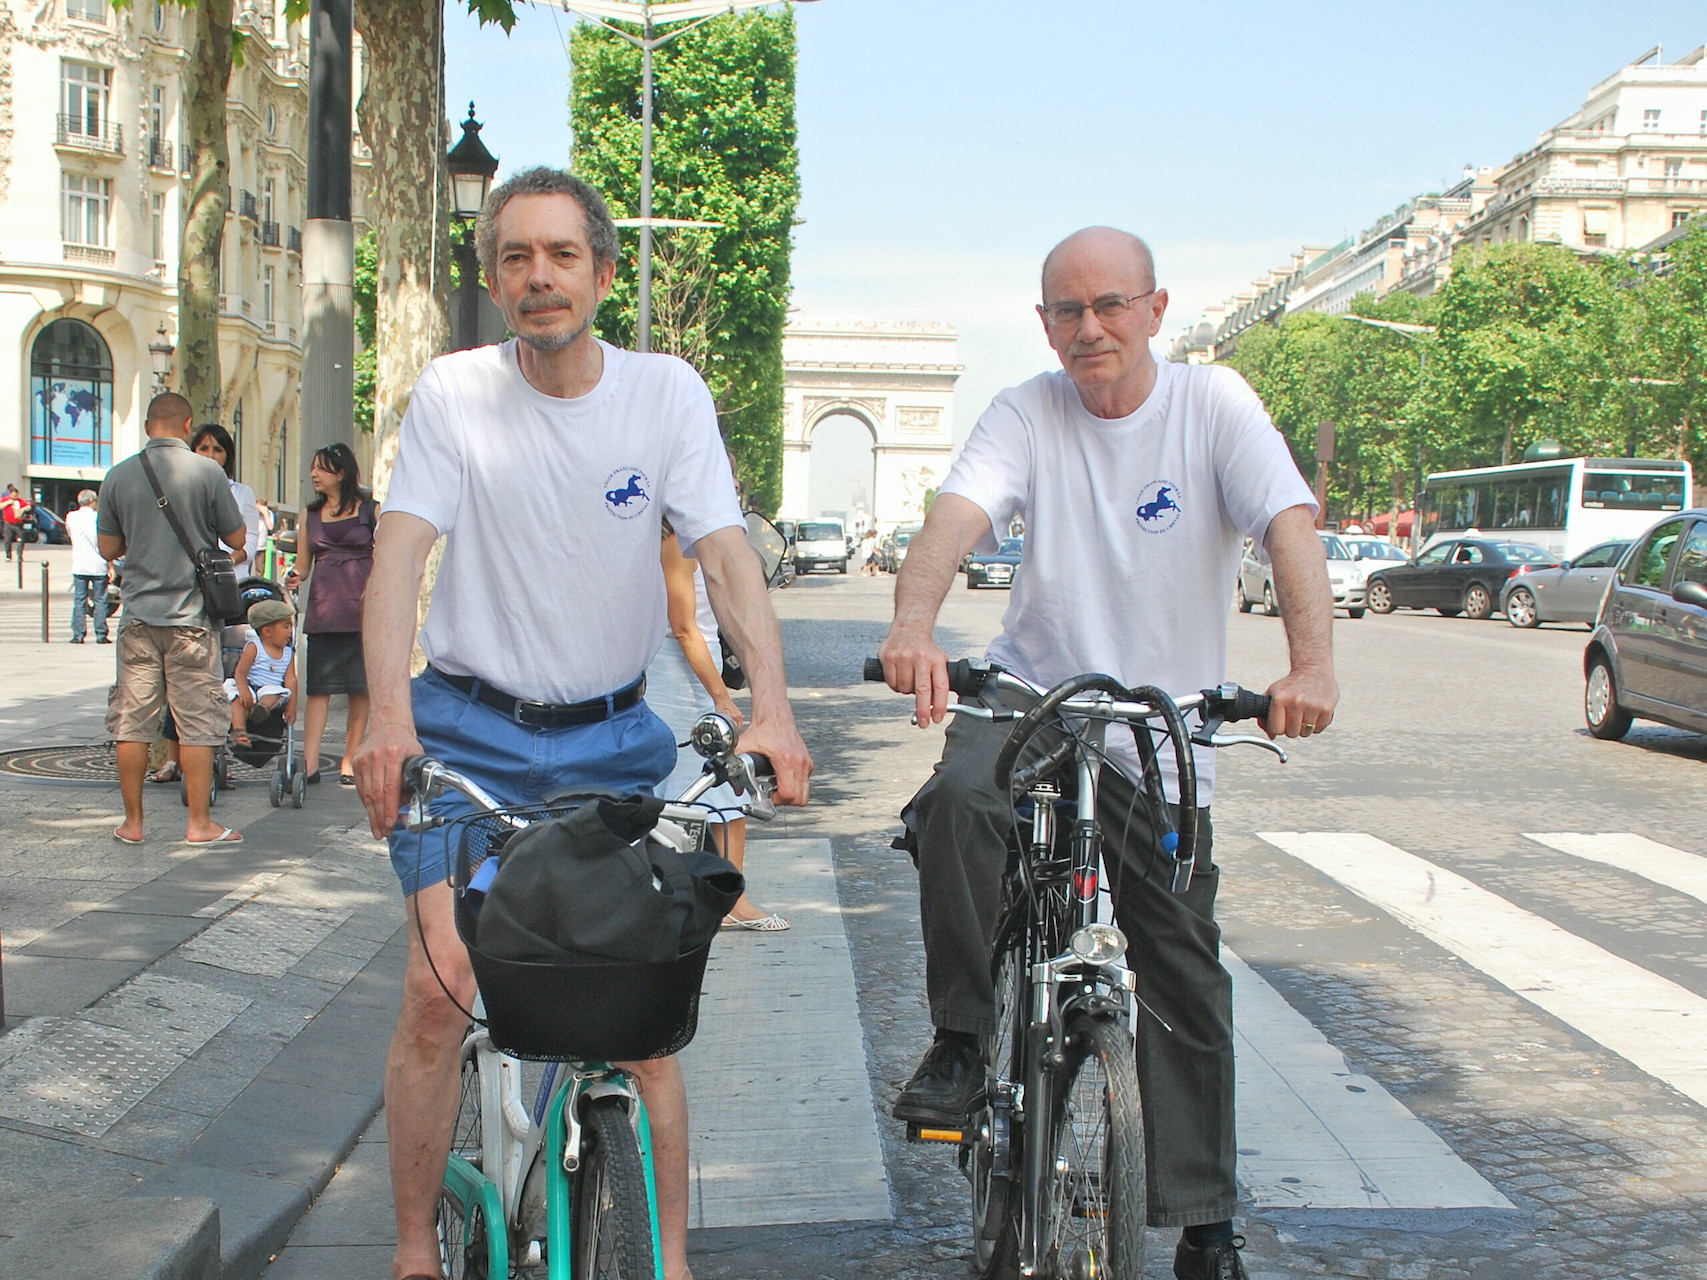 Intrepid duo: Cramer (right) with Alan Kennedy on the Champs Elysees in Paris during their marathon charity bike ride. Photo: John Gilmore